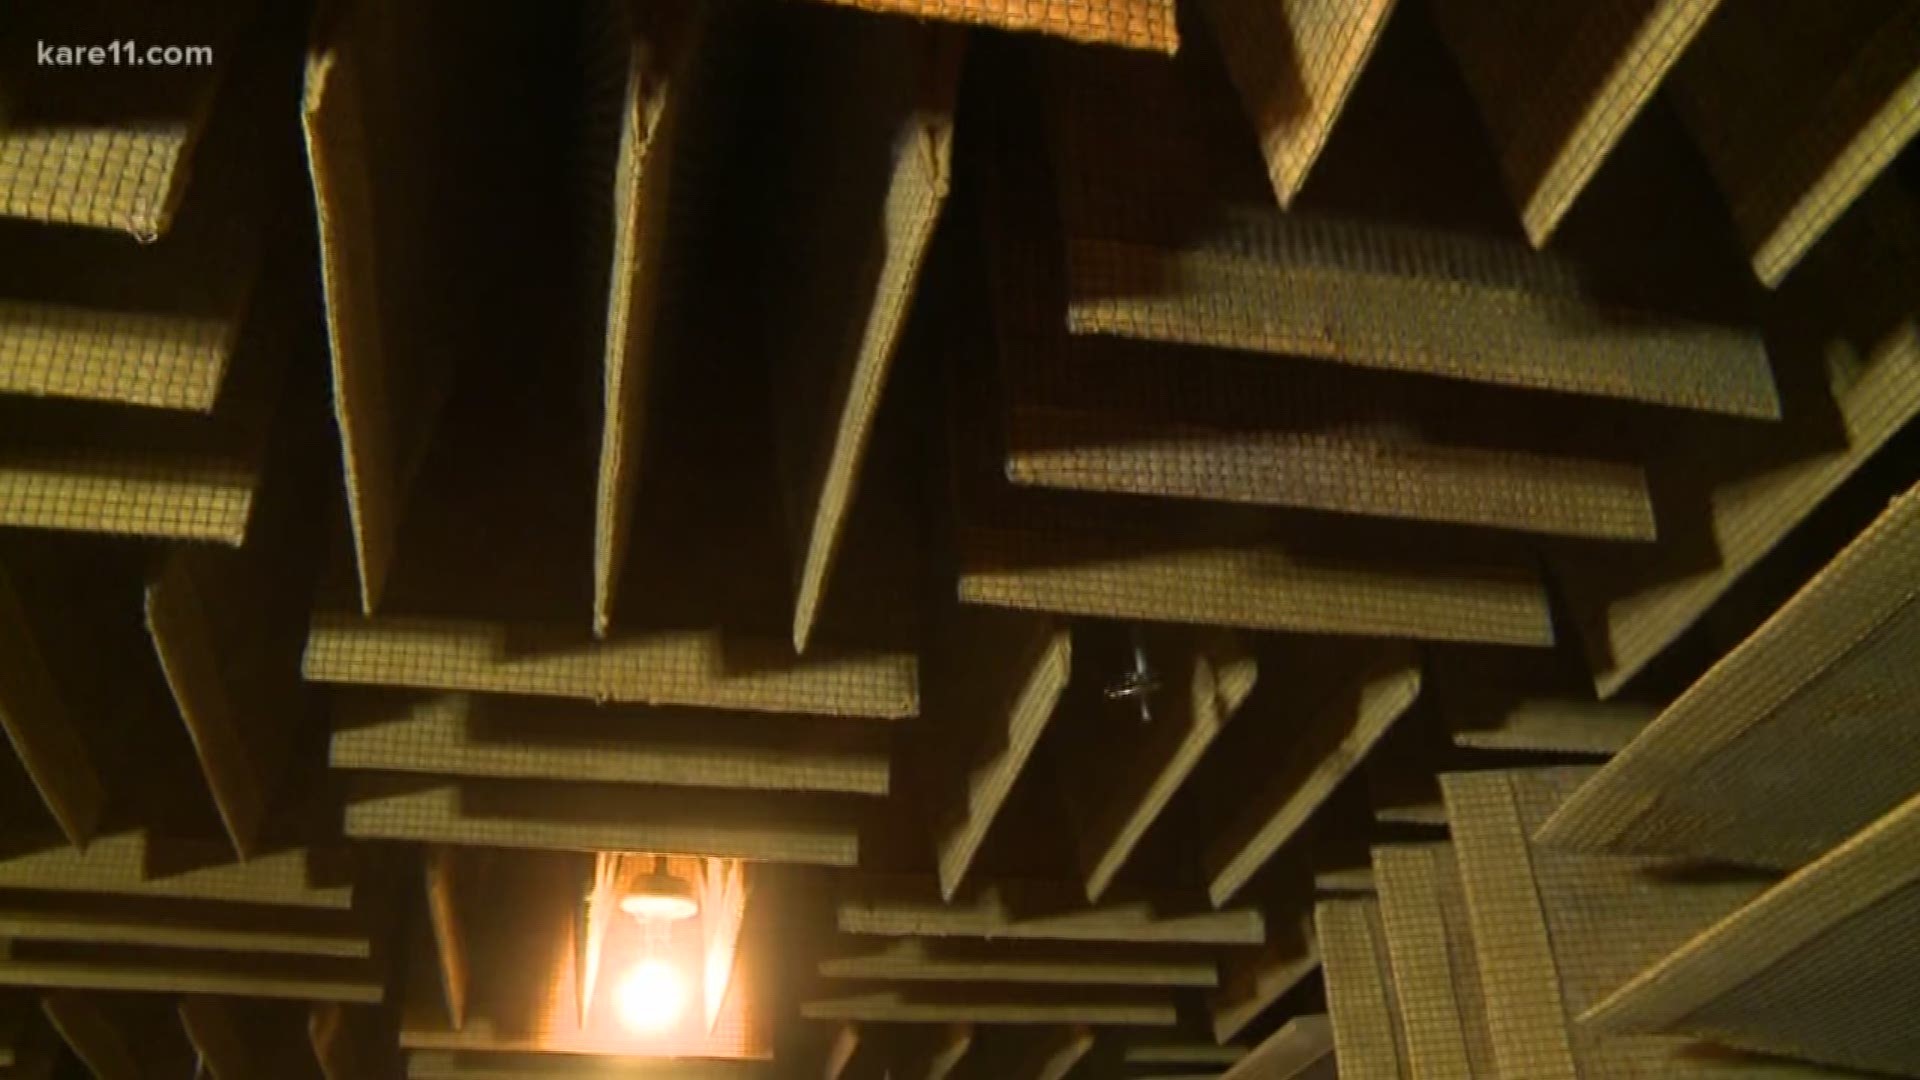 The experience inside the anechoic chamber is almost as haunting as the new movie "A Quiet Place," which takes silence to a whole new level. https://kare11.tv/2lEtgxA